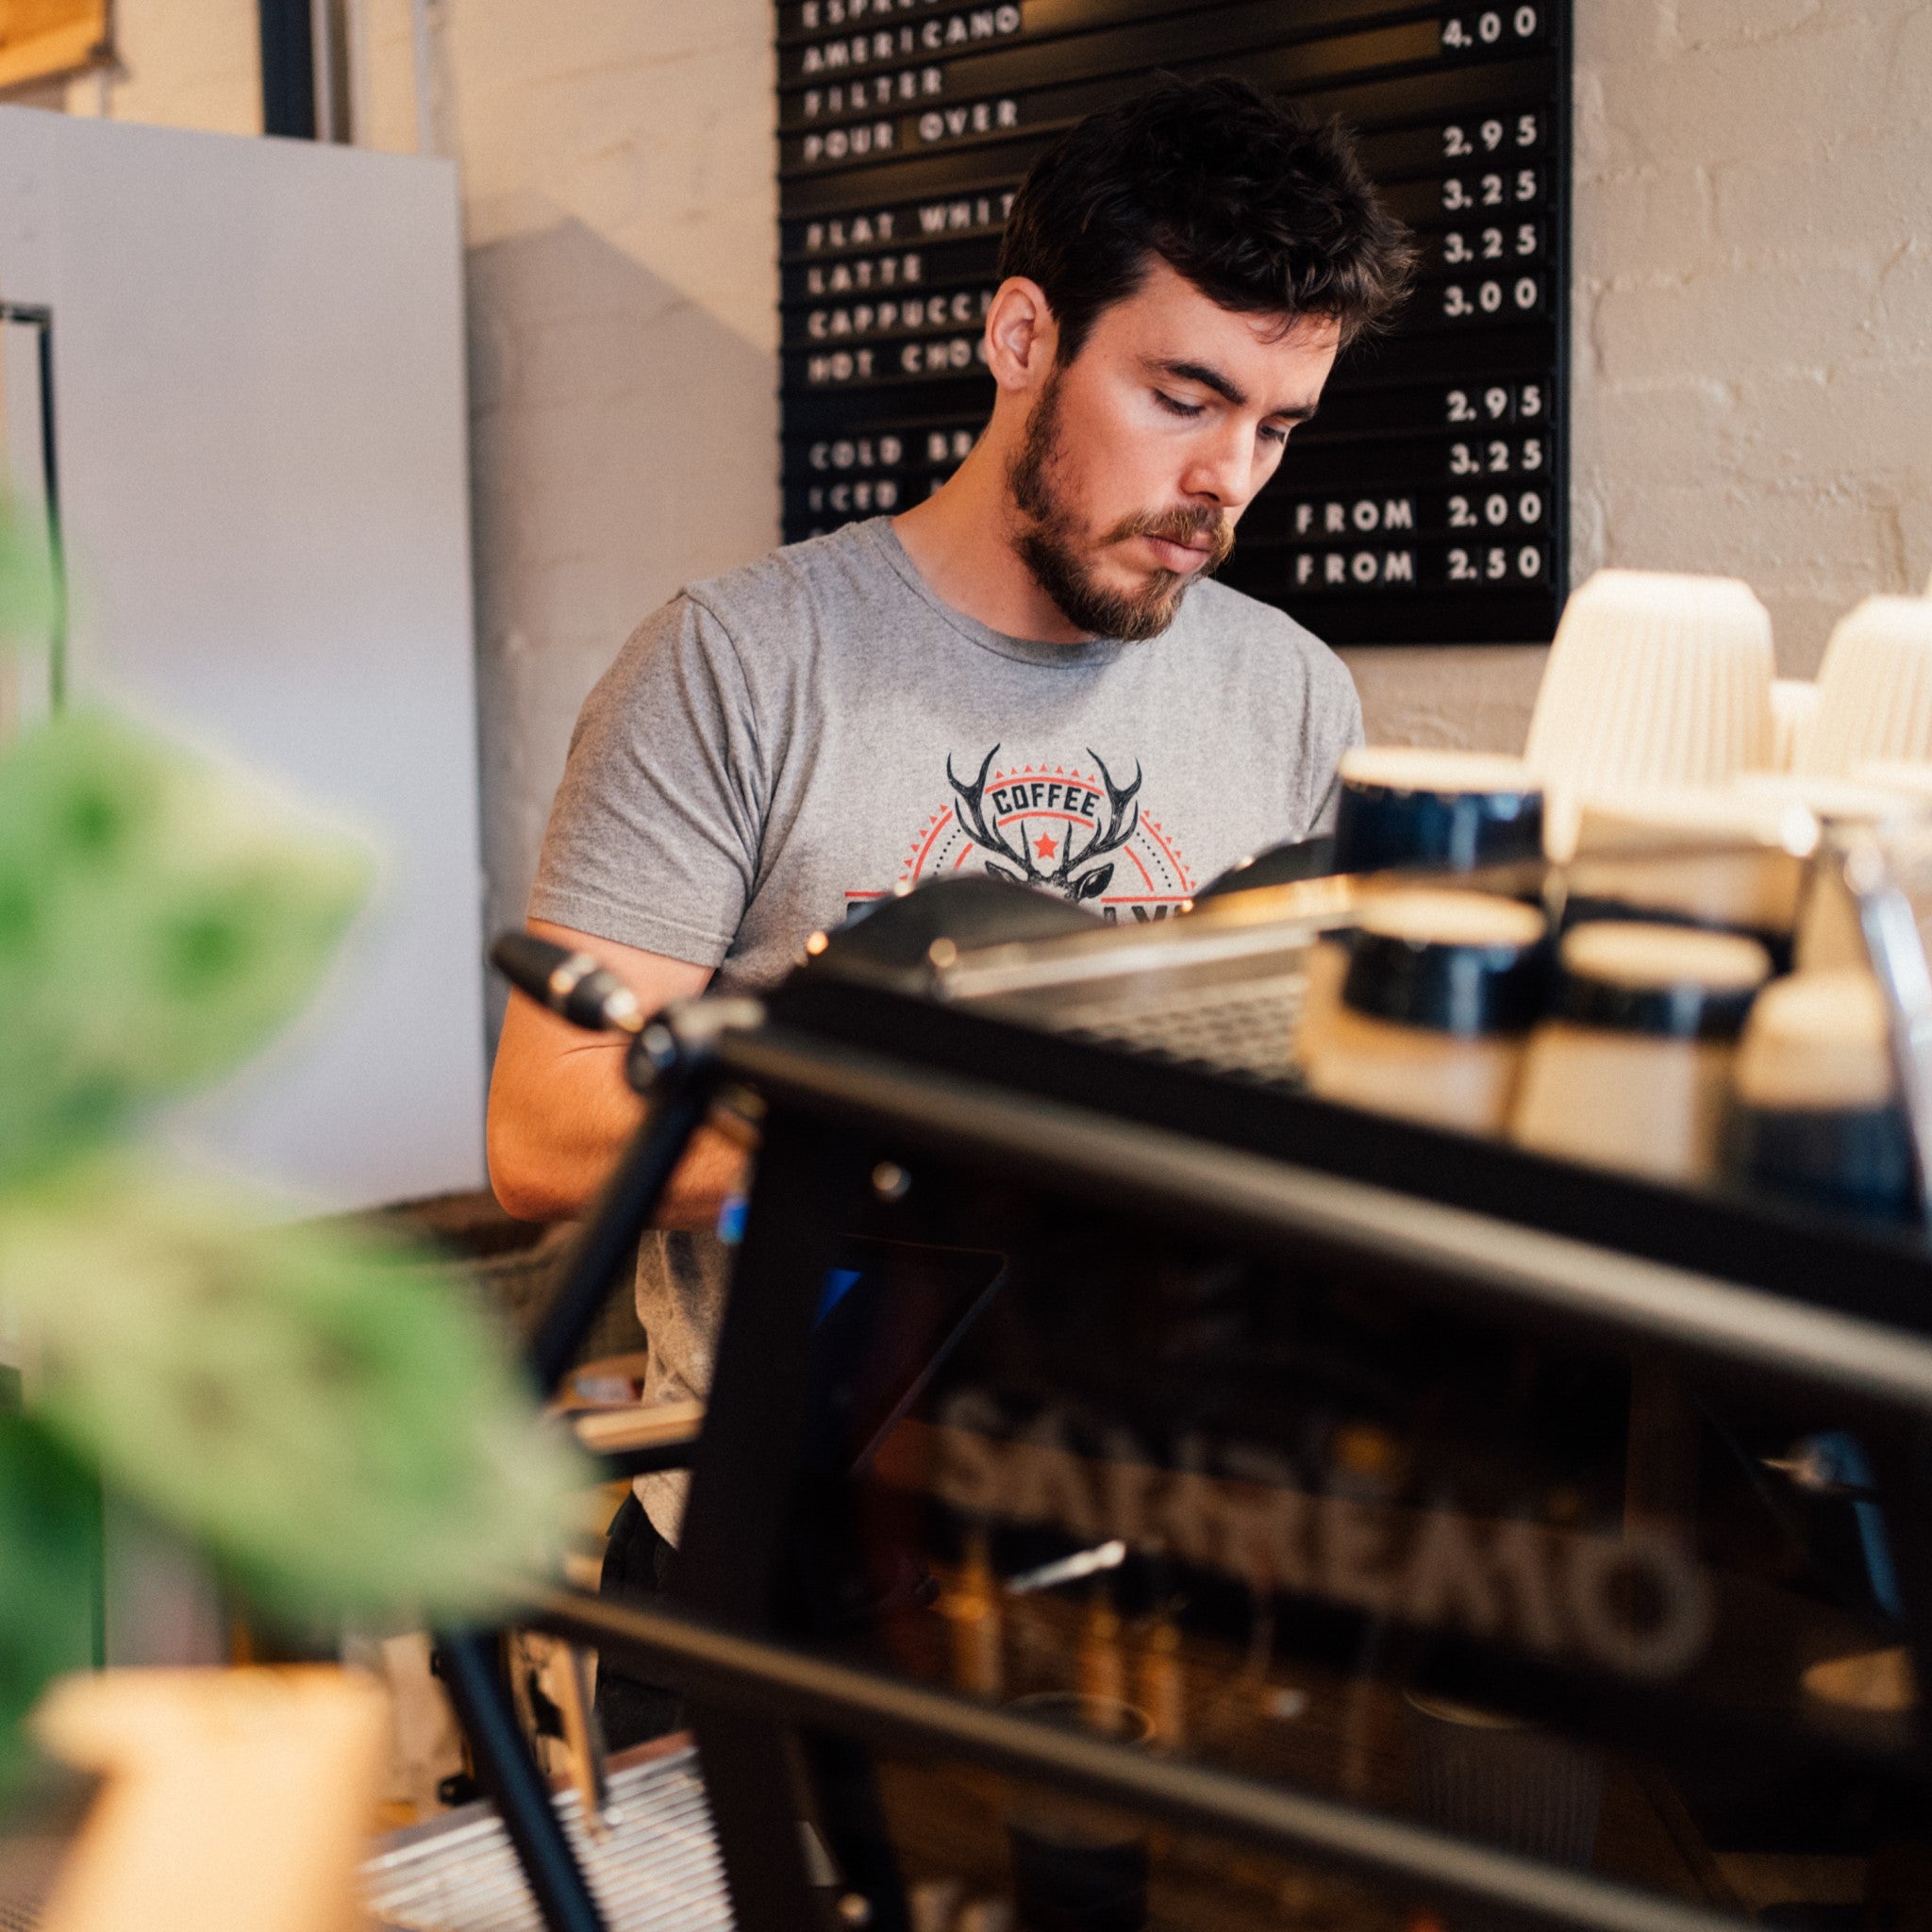 A speciality coffee barista works behind an espresso machine at the Glen Lyon Coffee roastery cafe